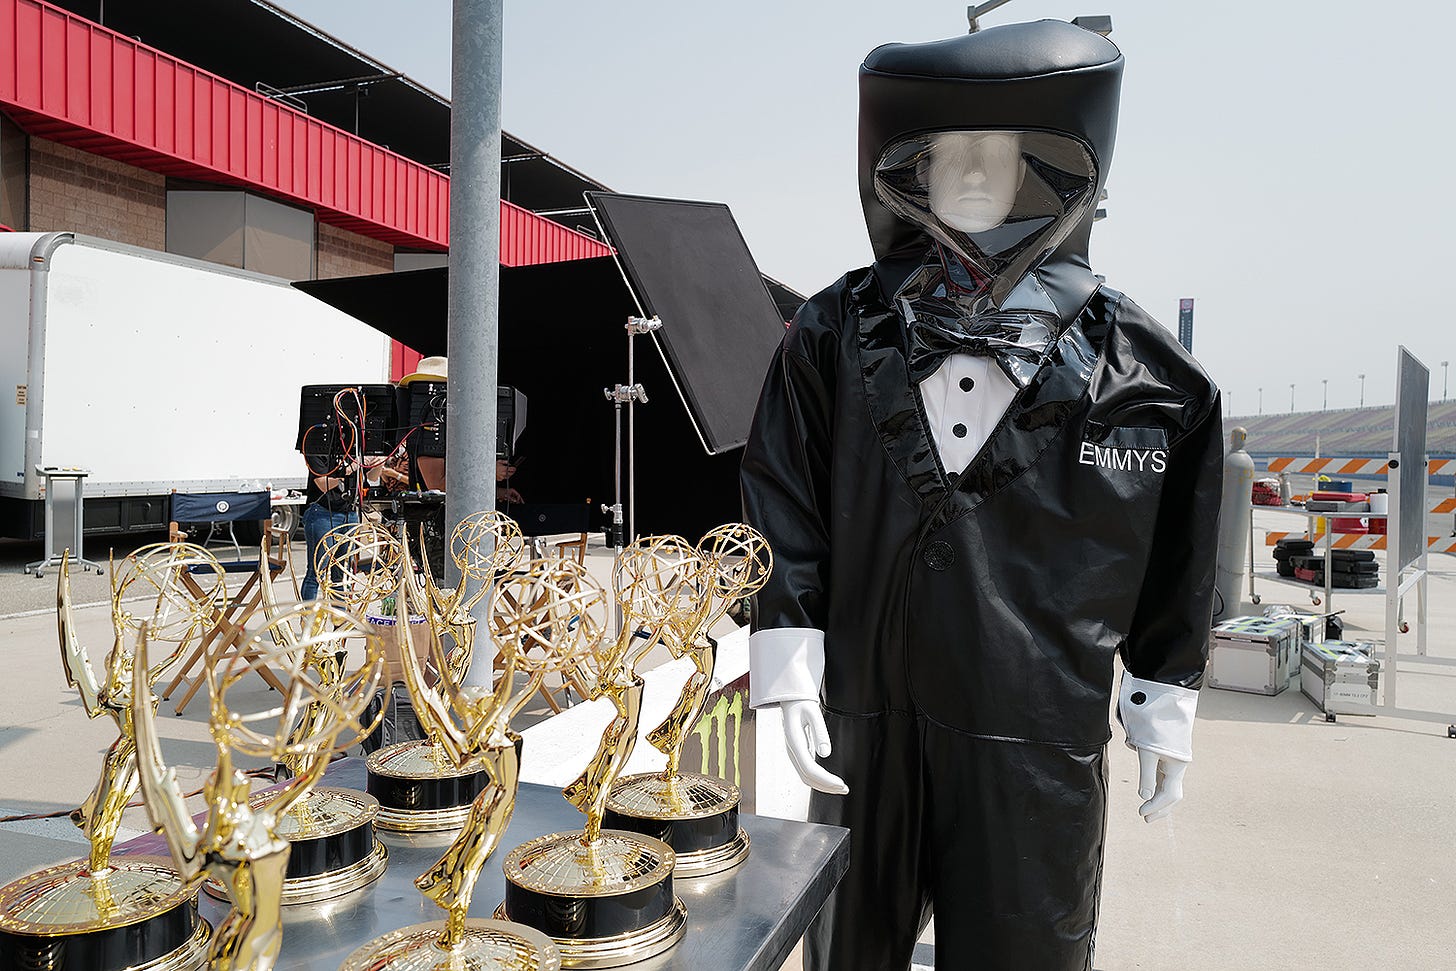 A mannequin in a hazmat suit that says "Emmy's" stands over some trophies. 